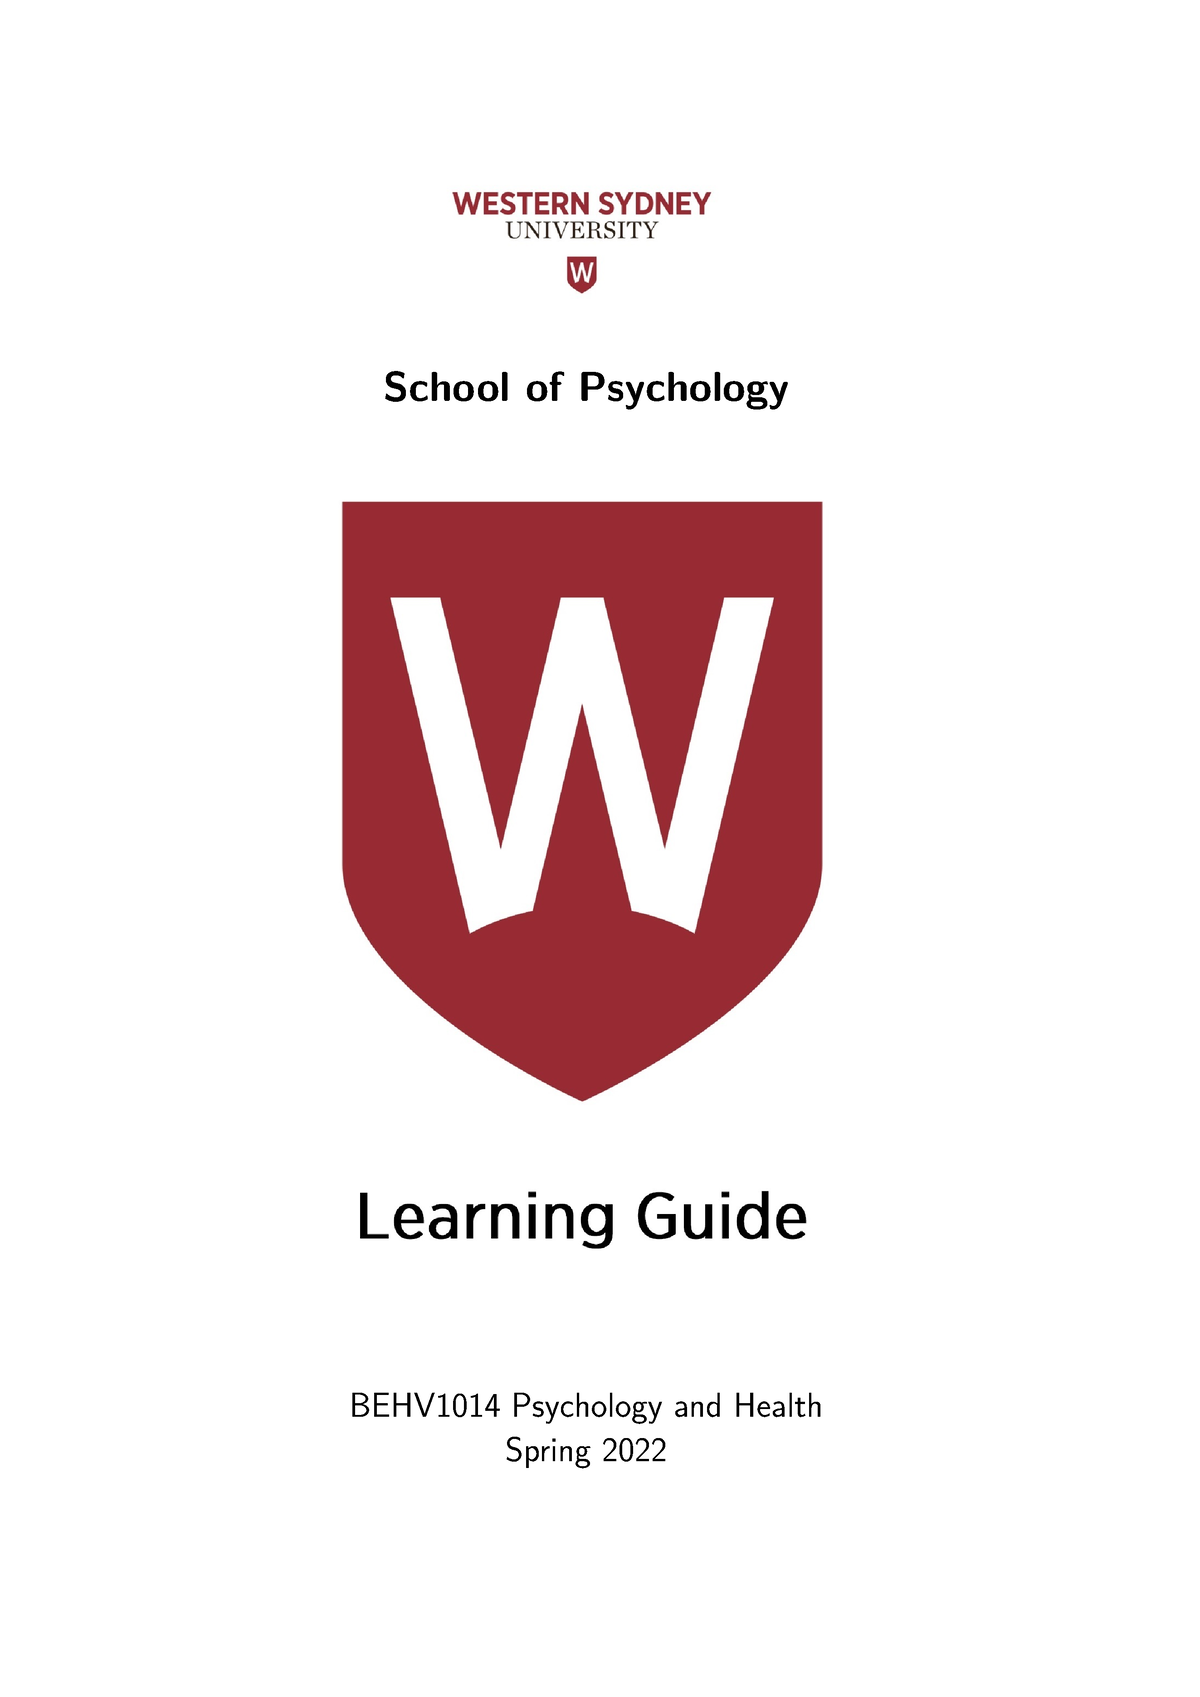 Learning guide - School of Psychology BEHV1014 Psychology and Health